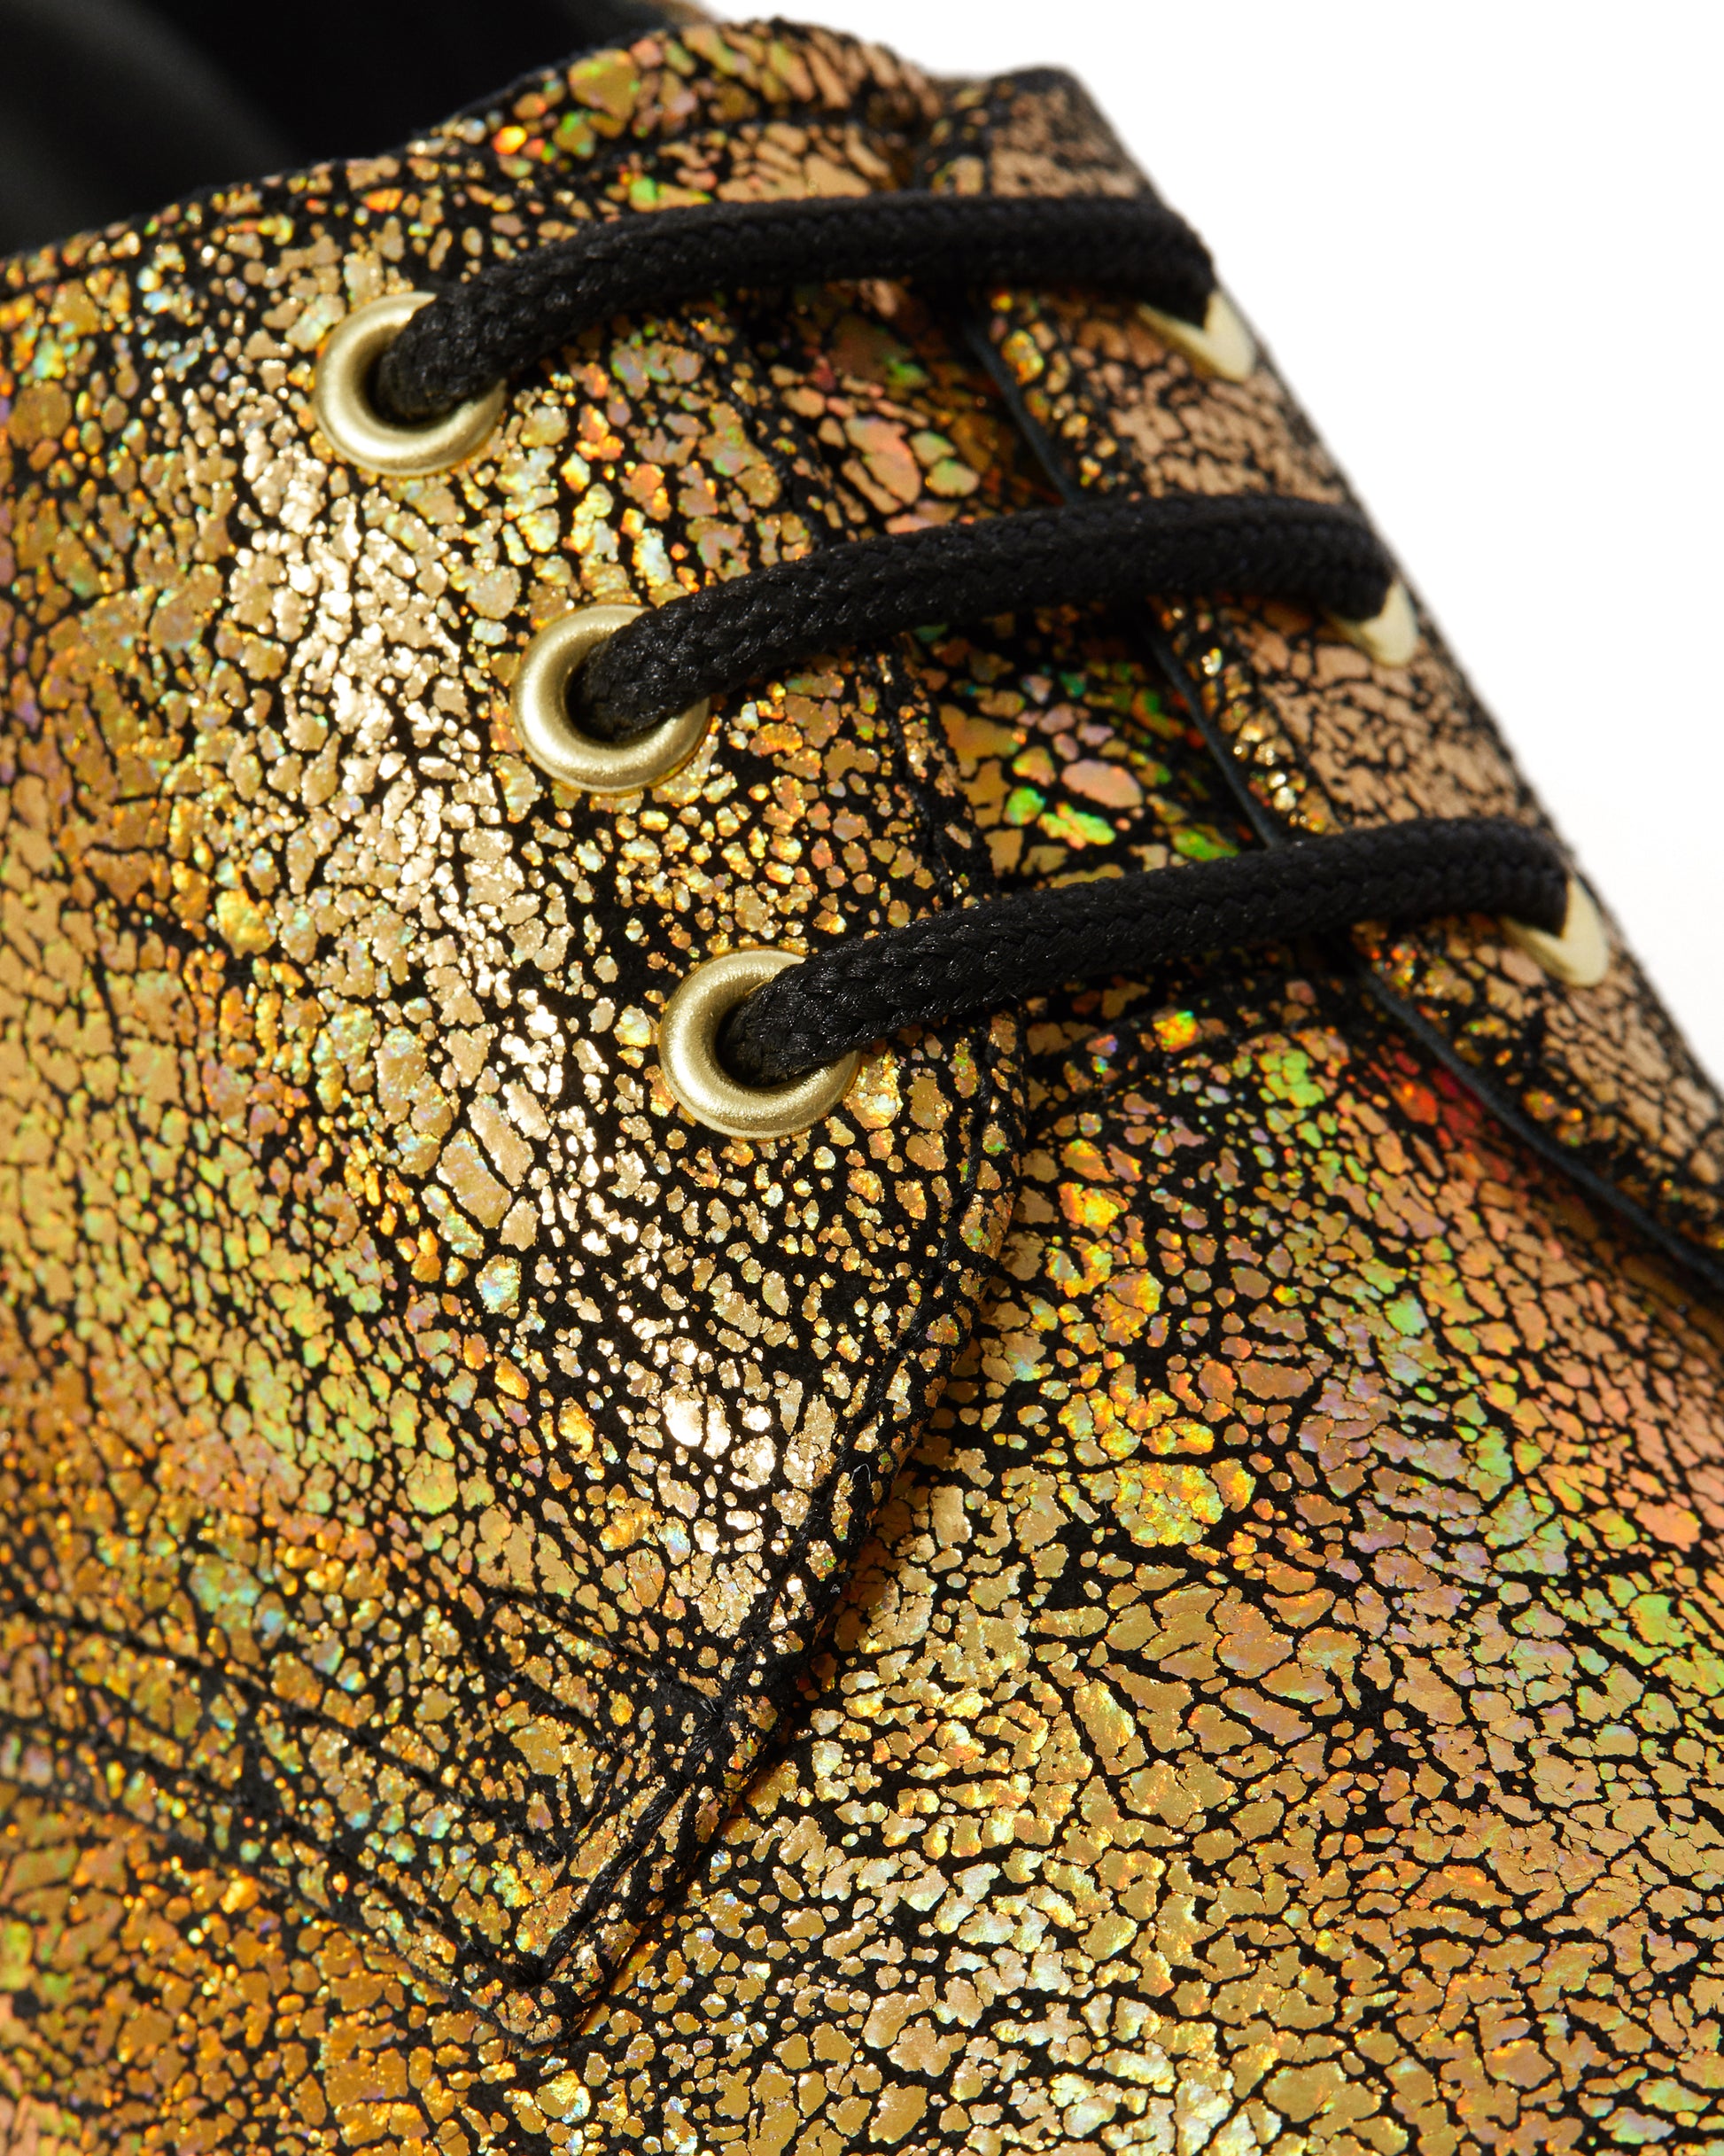 1461 GOLD IRIDESCENT CRACKLE OXFORD